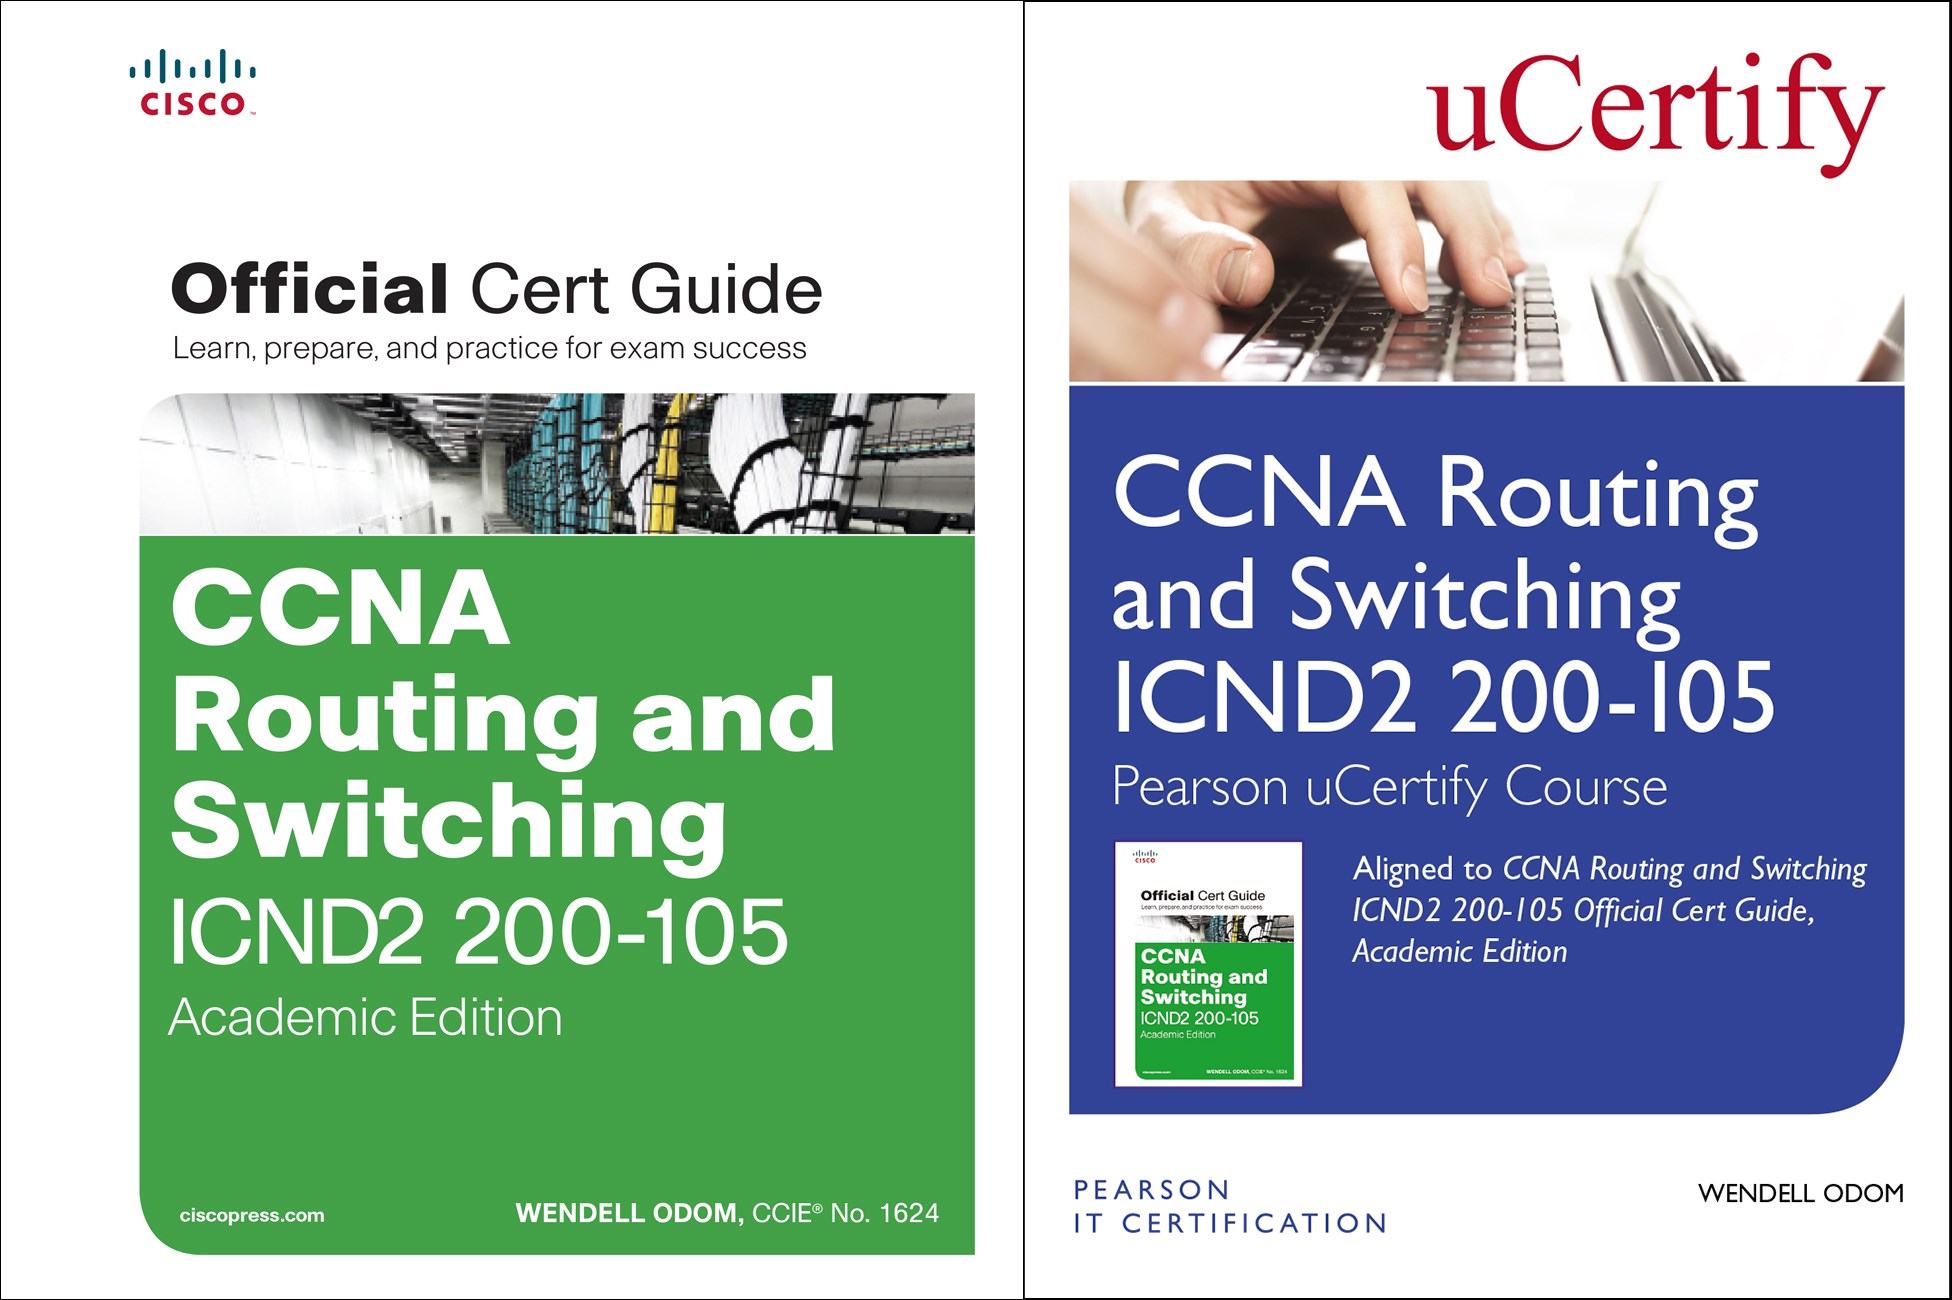 CCNA Routing and Switching ICND2 200-105 Pearson uCertify Course and Textbook Academic Edition Bundle